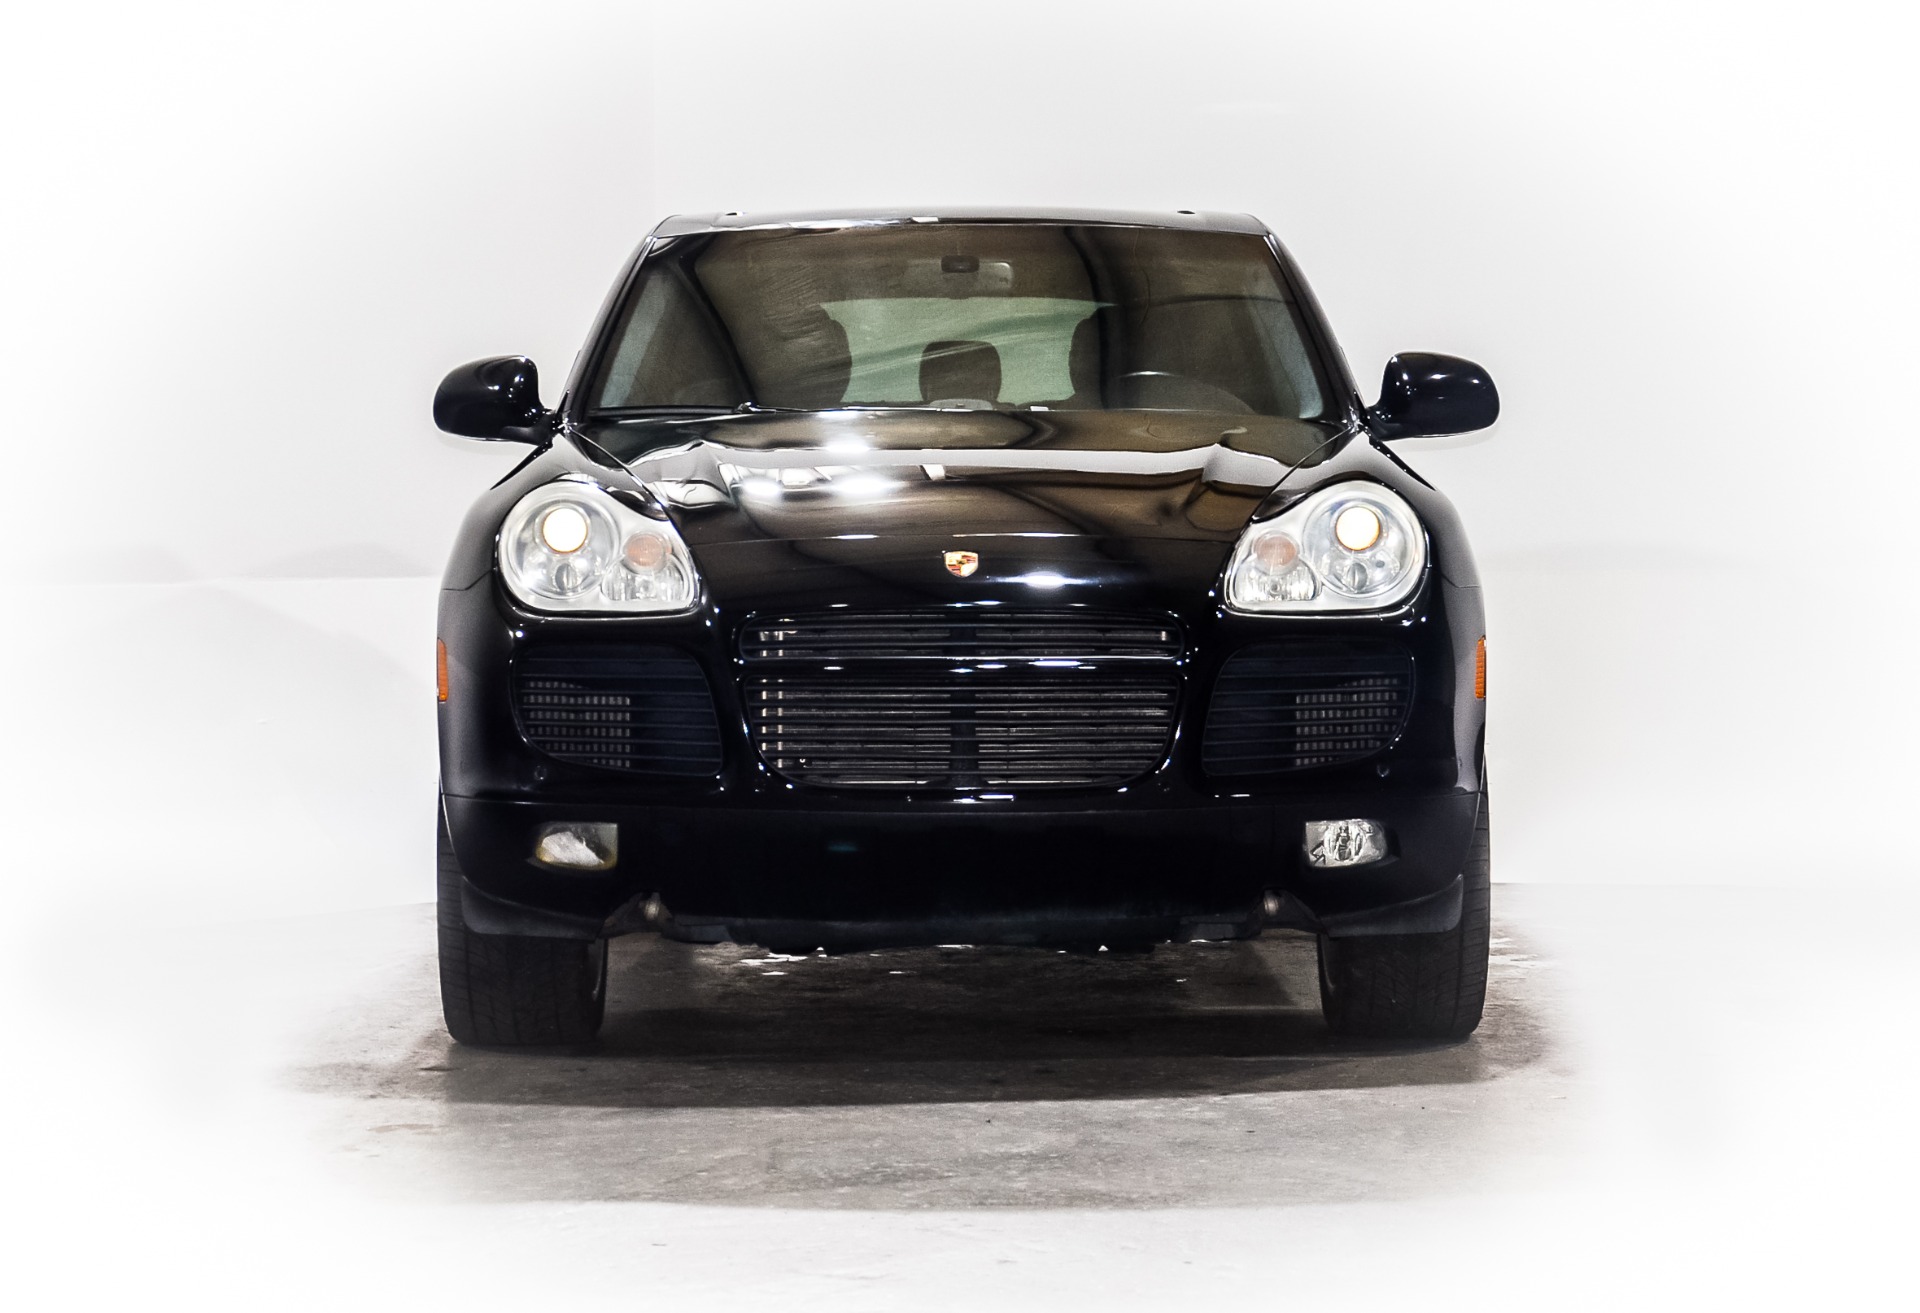 Used 05 Porsche Cayenne Turbo For Sale Sold Car Xoom Stock 1351